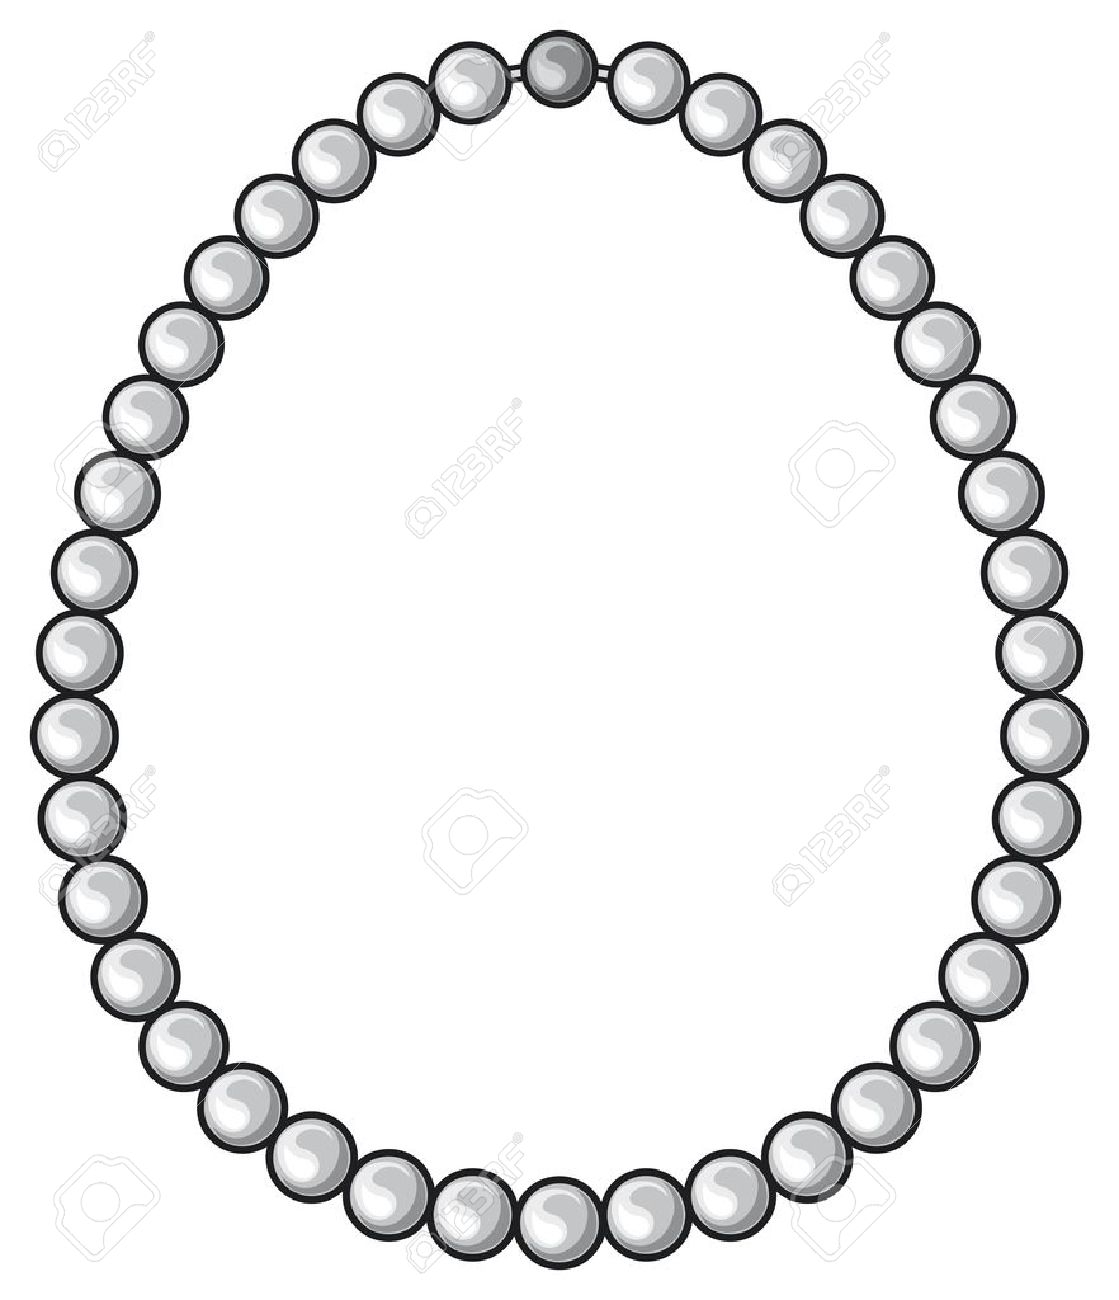 Pearl Necklace Clipart.